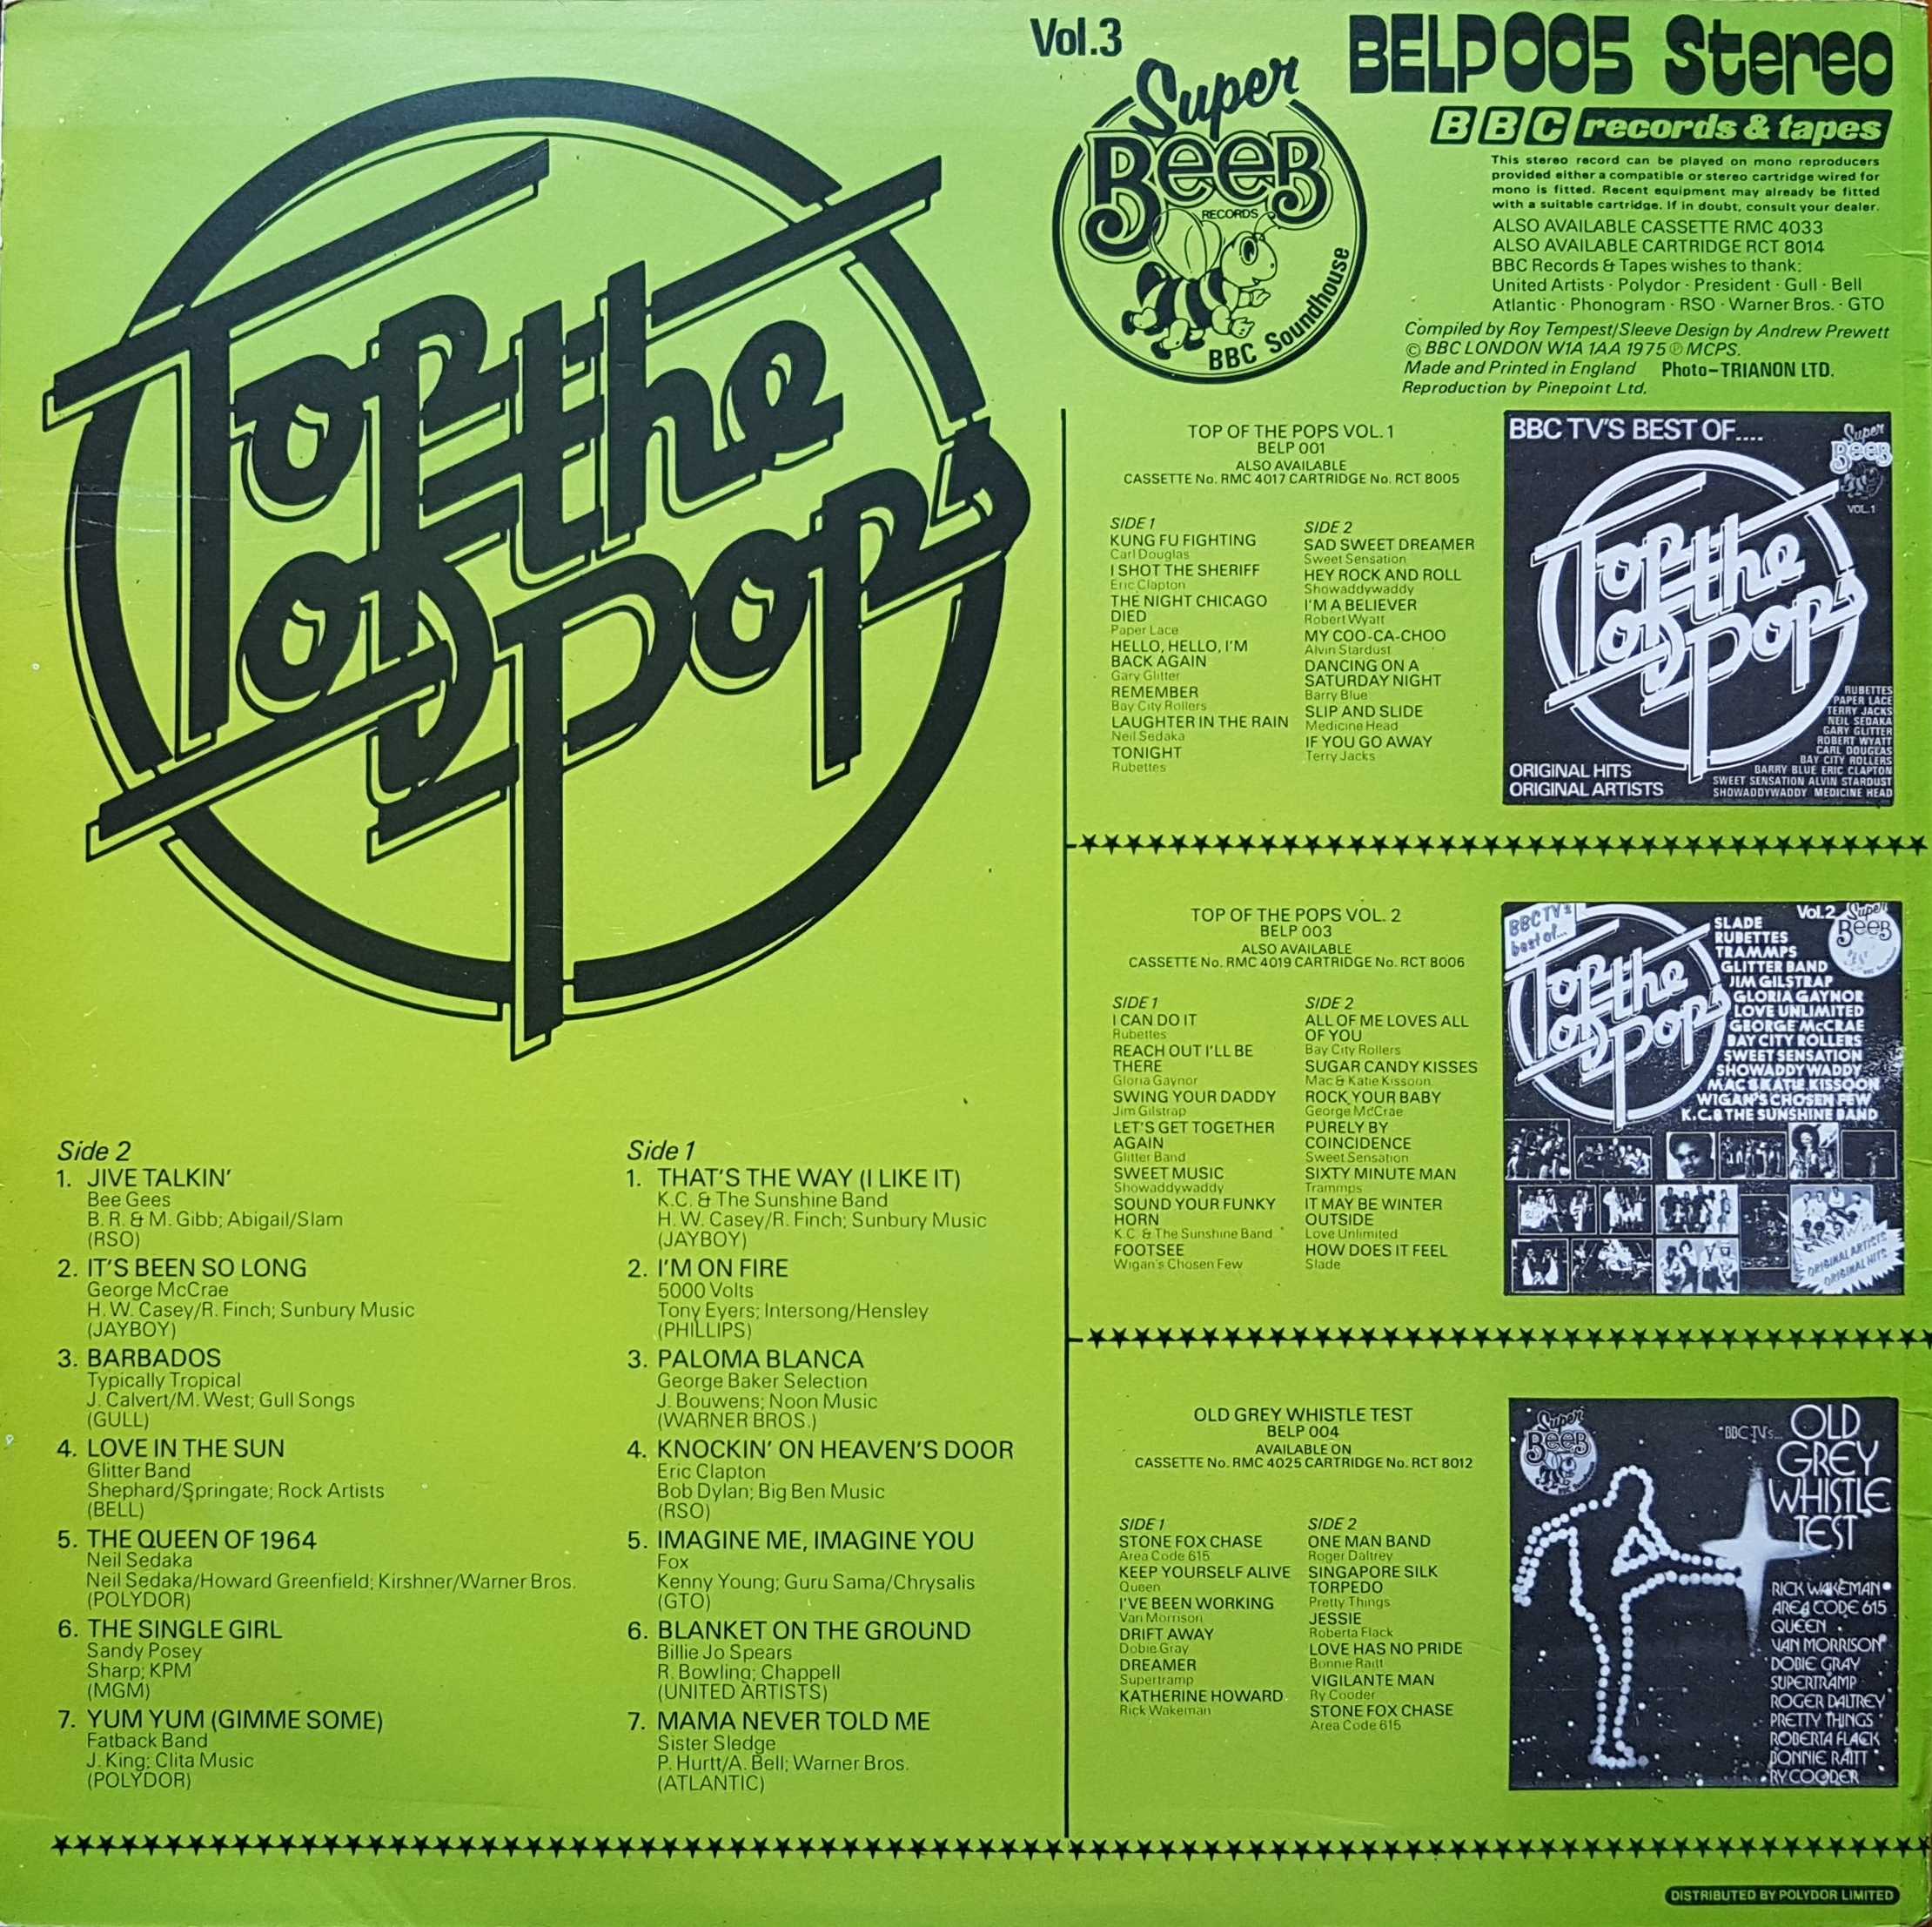 Picture of BELP 005 BBC TV's best of top of the pops - Volume 3 by artist Various from the BBC records and Tapes library